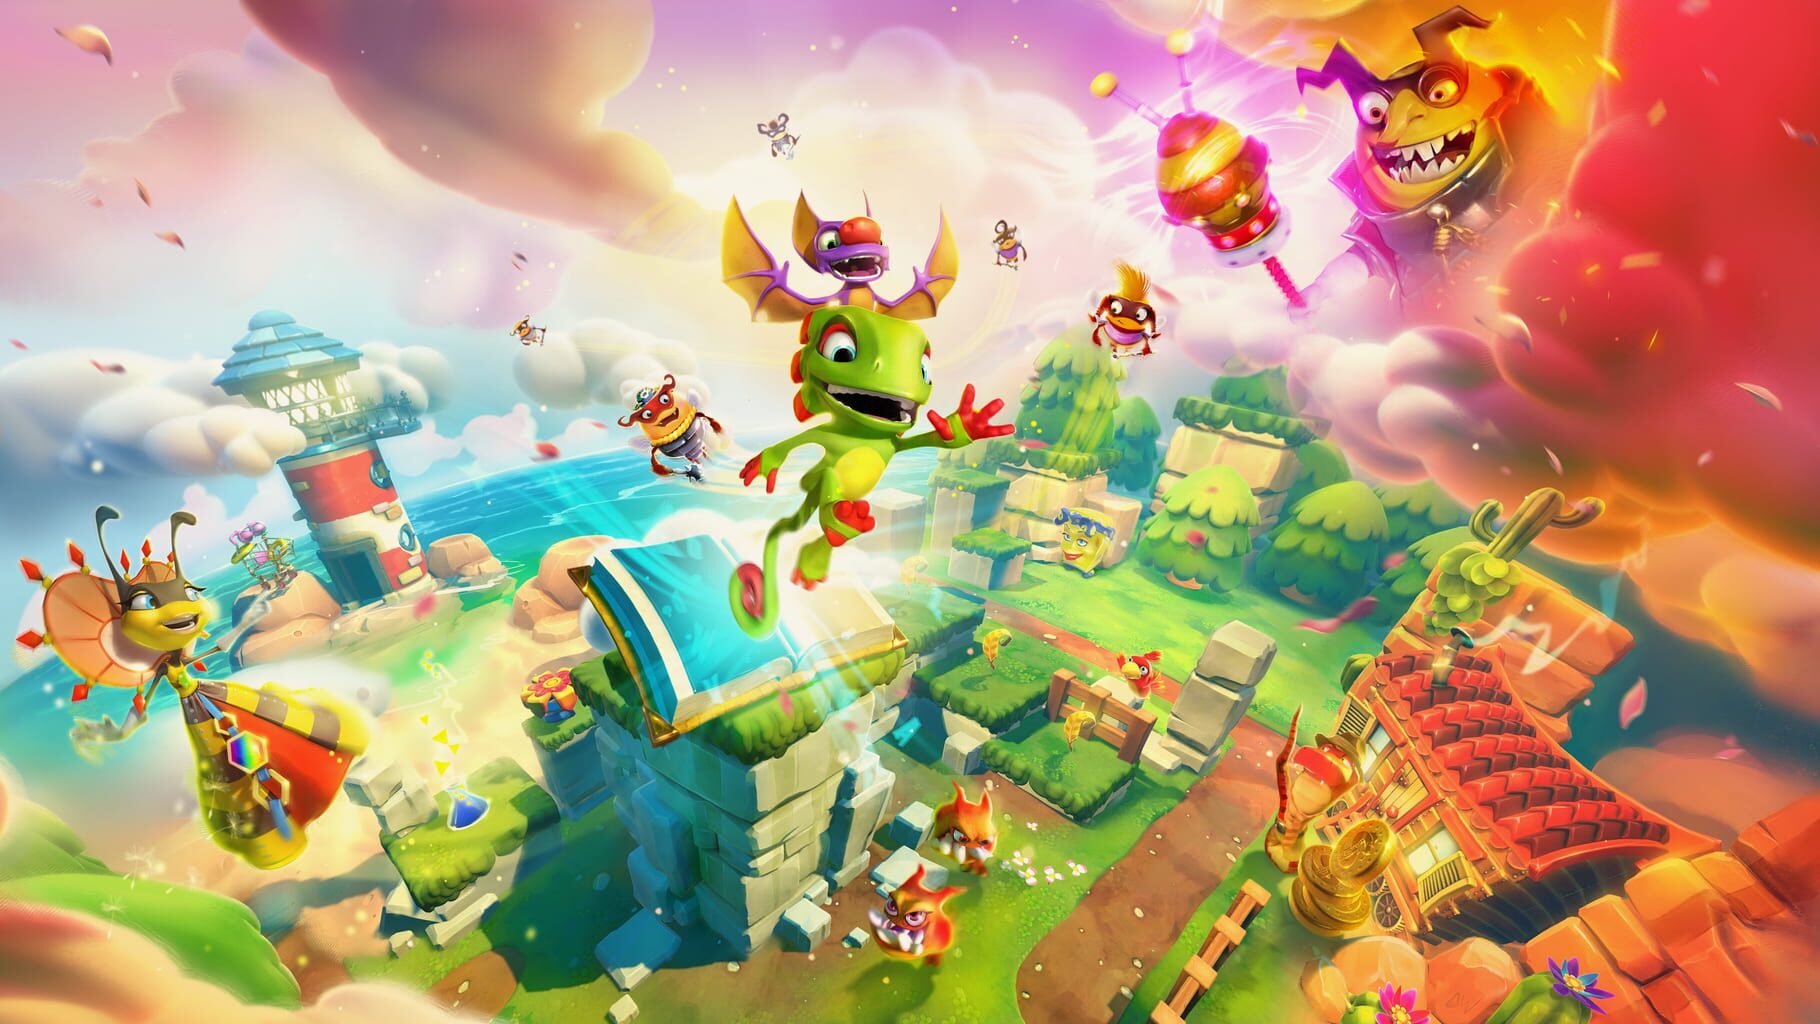 Artwork for Yooka-Laylee and the Impossible Lair